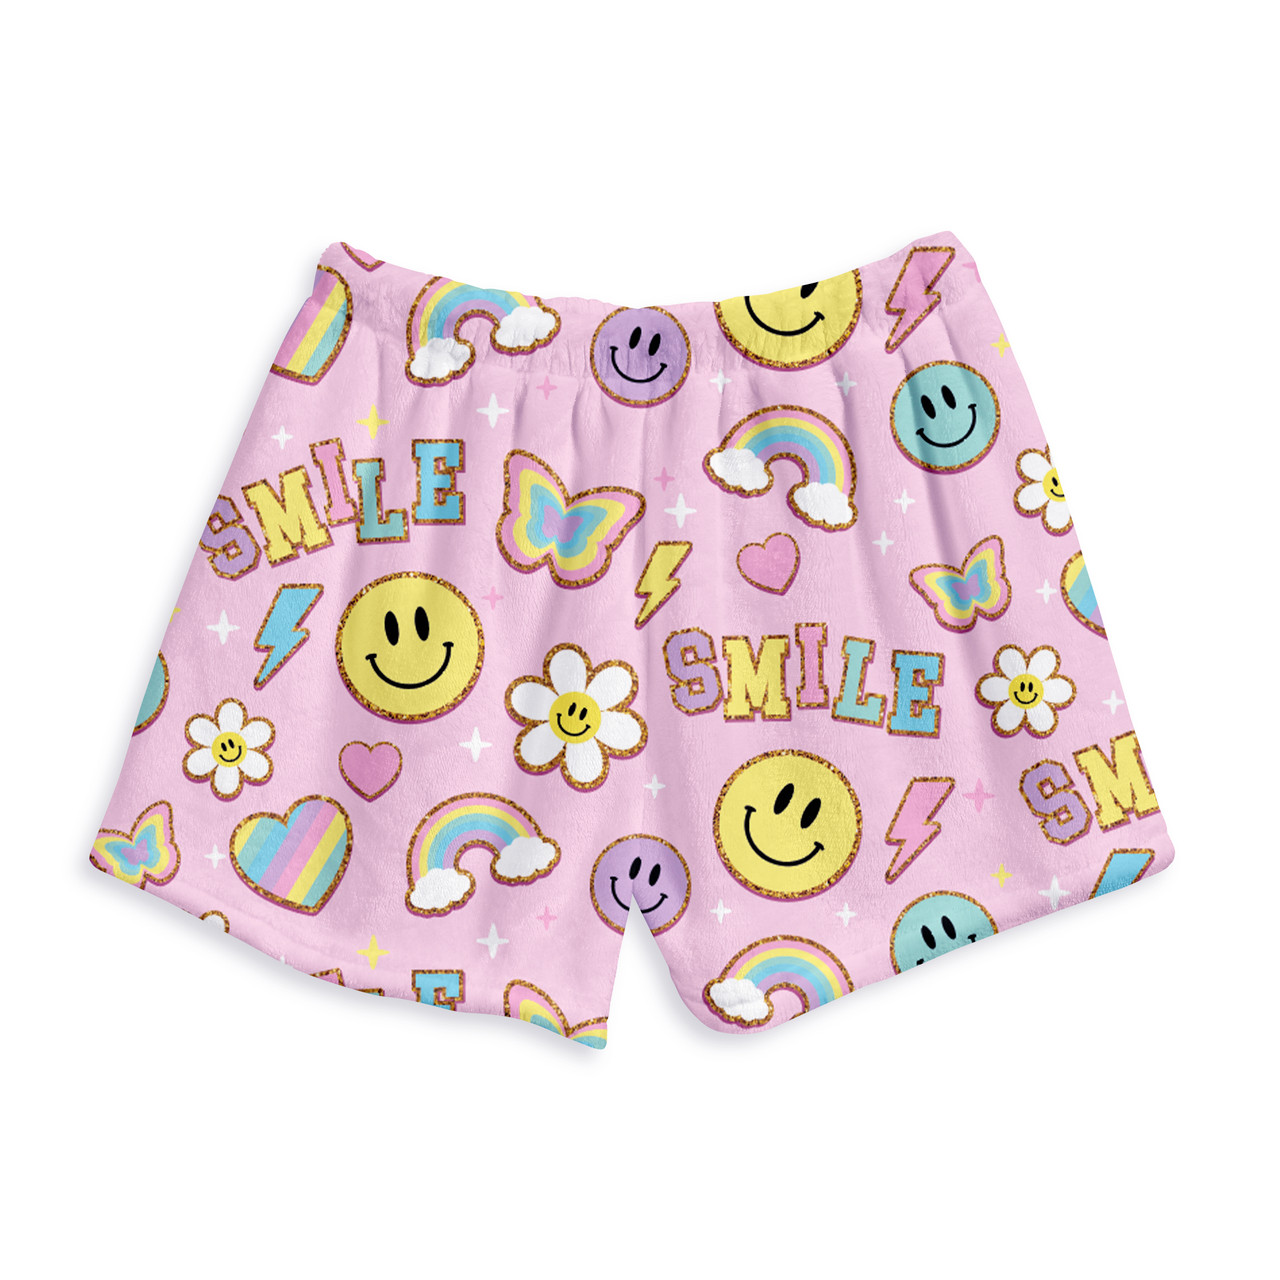 Cozy Printed Fuzzy Lounge Shorts For Kids And Tweens